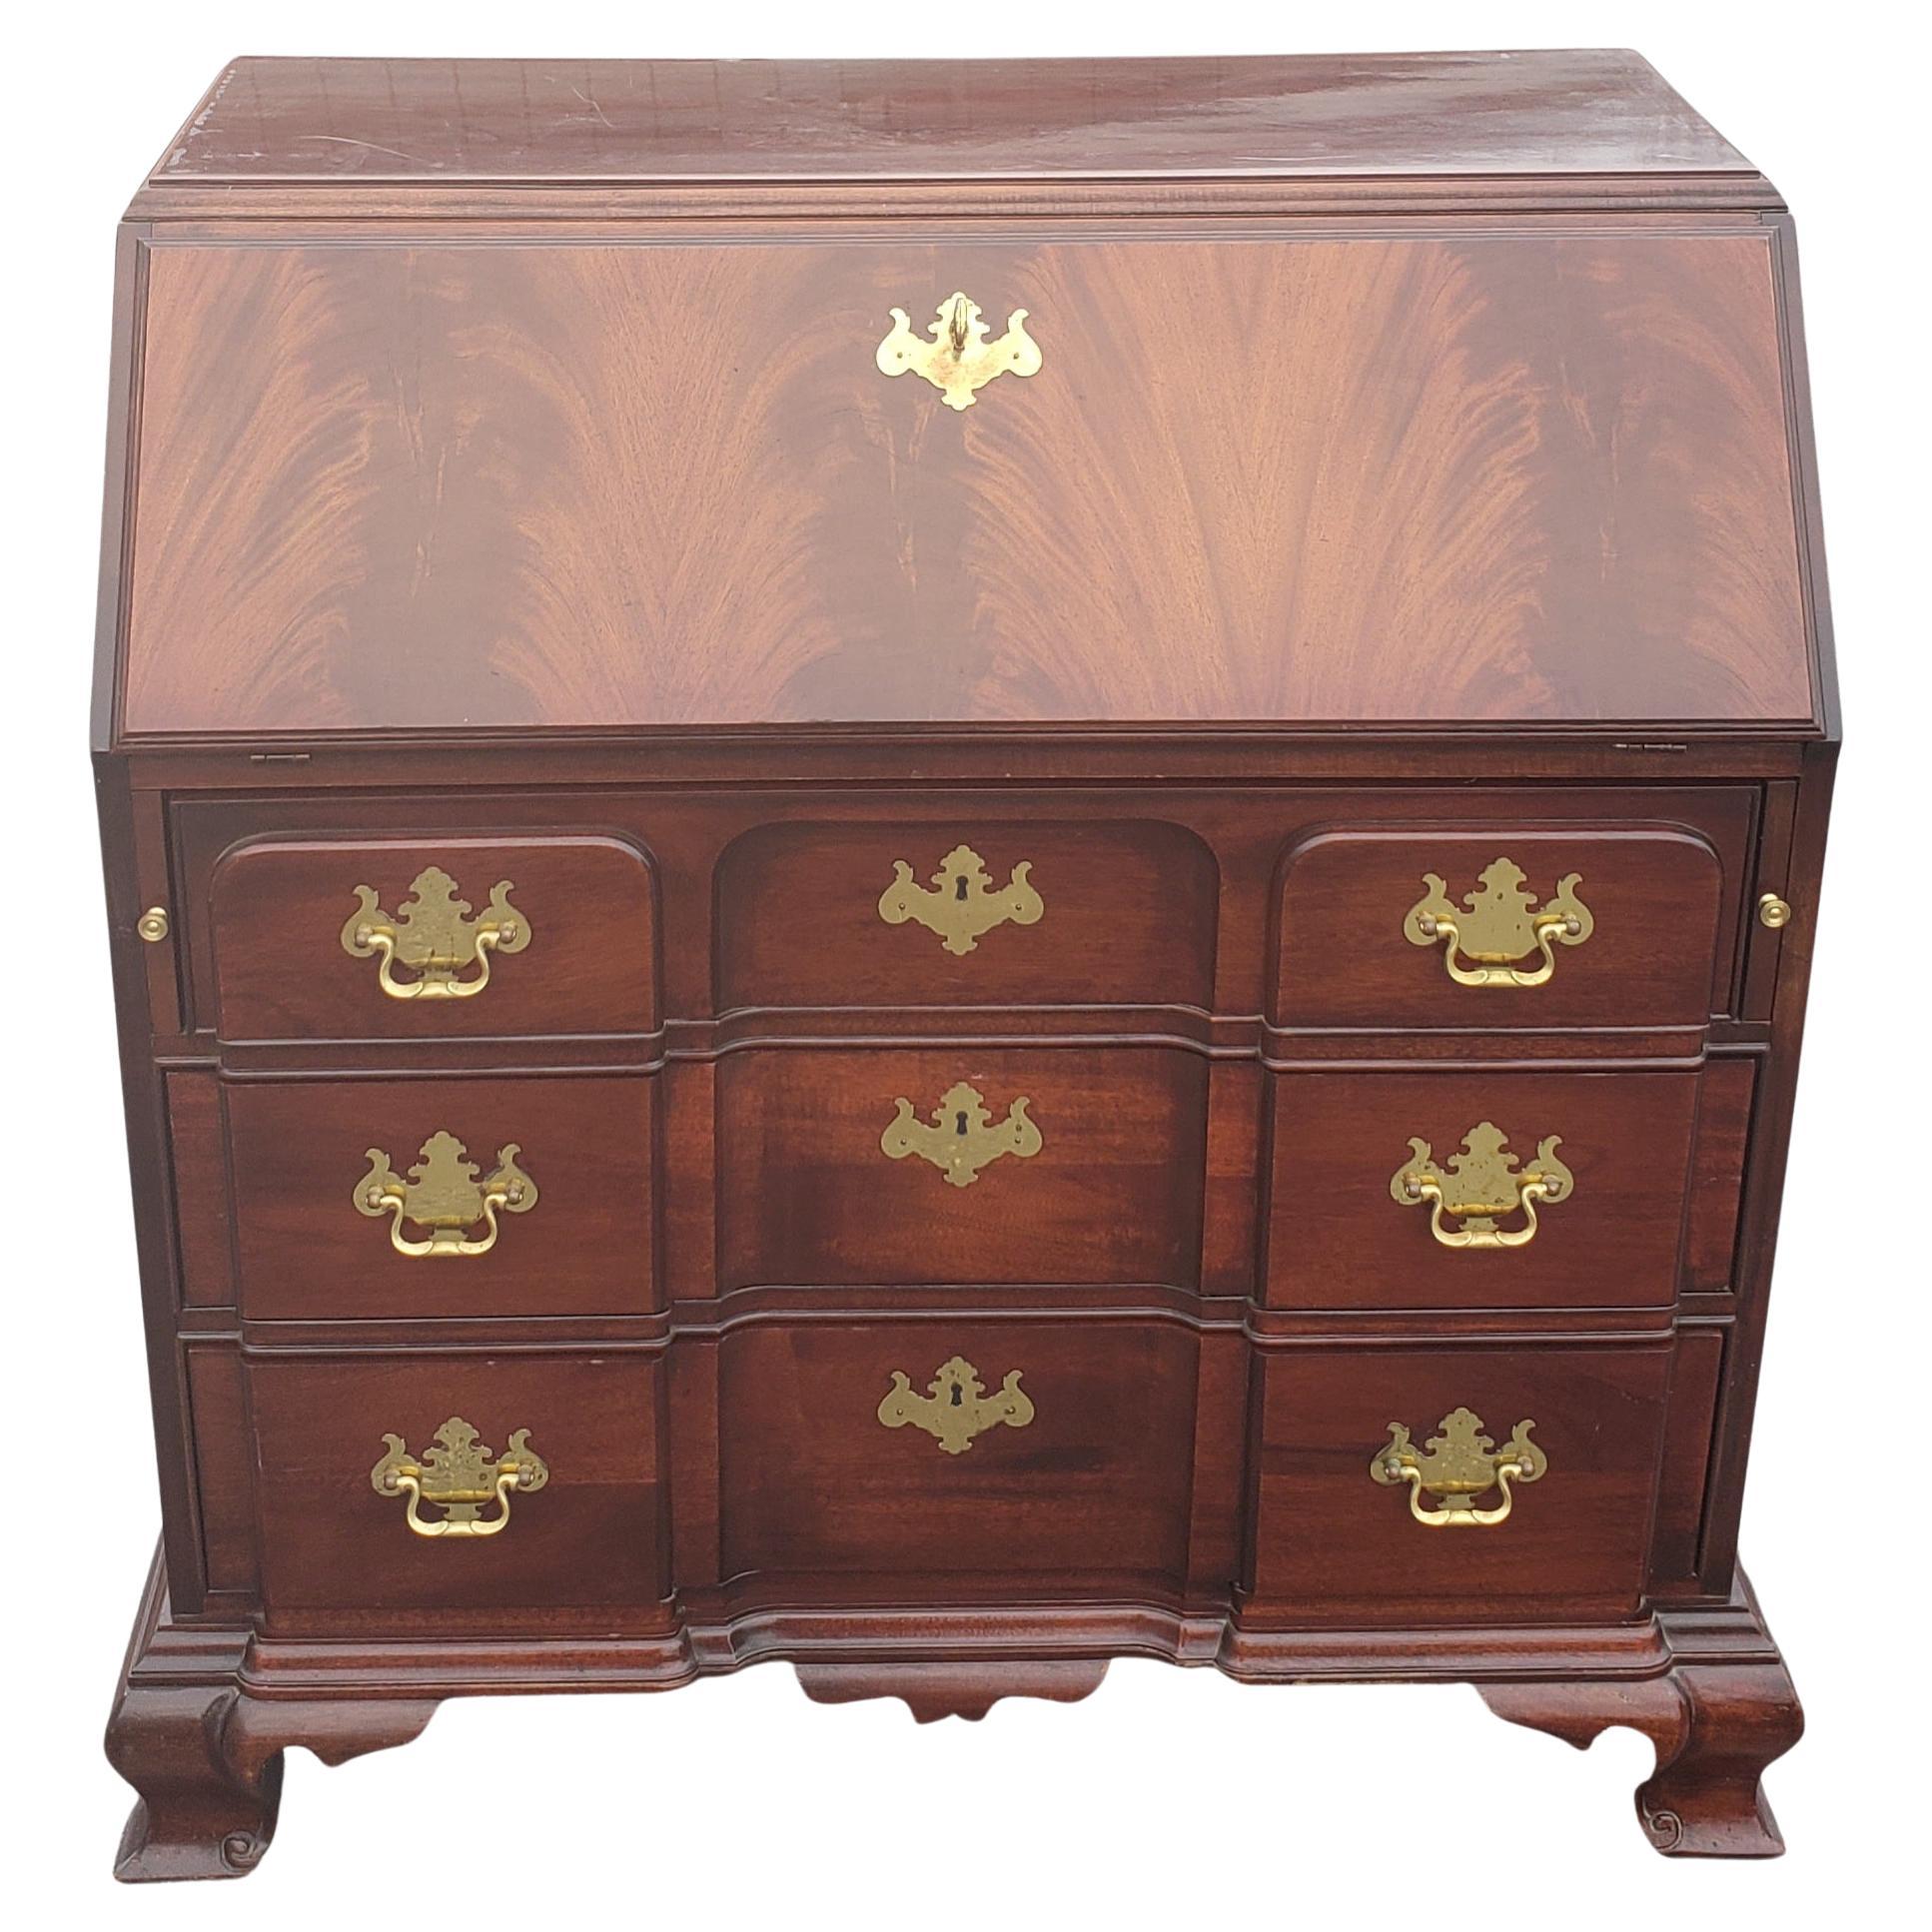 This Georgian style traditional block front secretary desk is matched flame grain mahogany is signed Thomasville 
Original finish in fine condition.
Brass hardware is original and heavy weight, drawers have solid oak sides. The drop front rests on